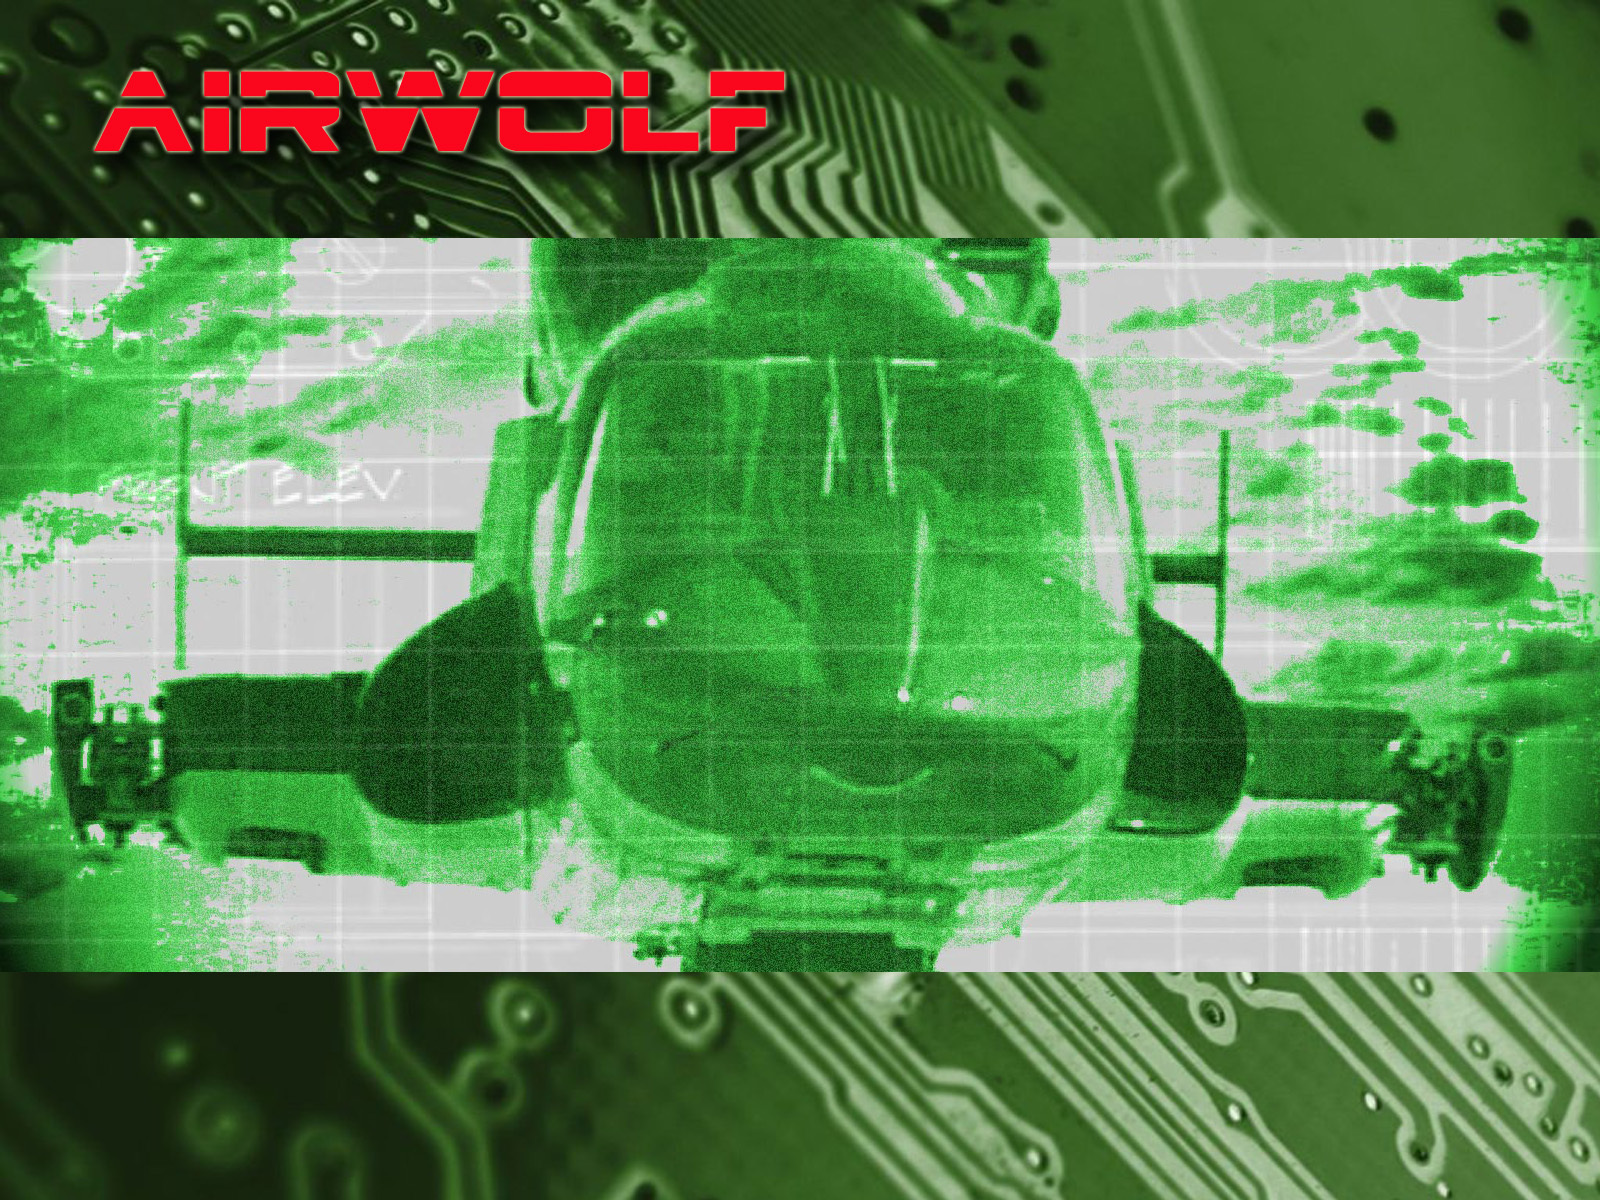 Airwolf Image HD Wallpaper And Background Photos